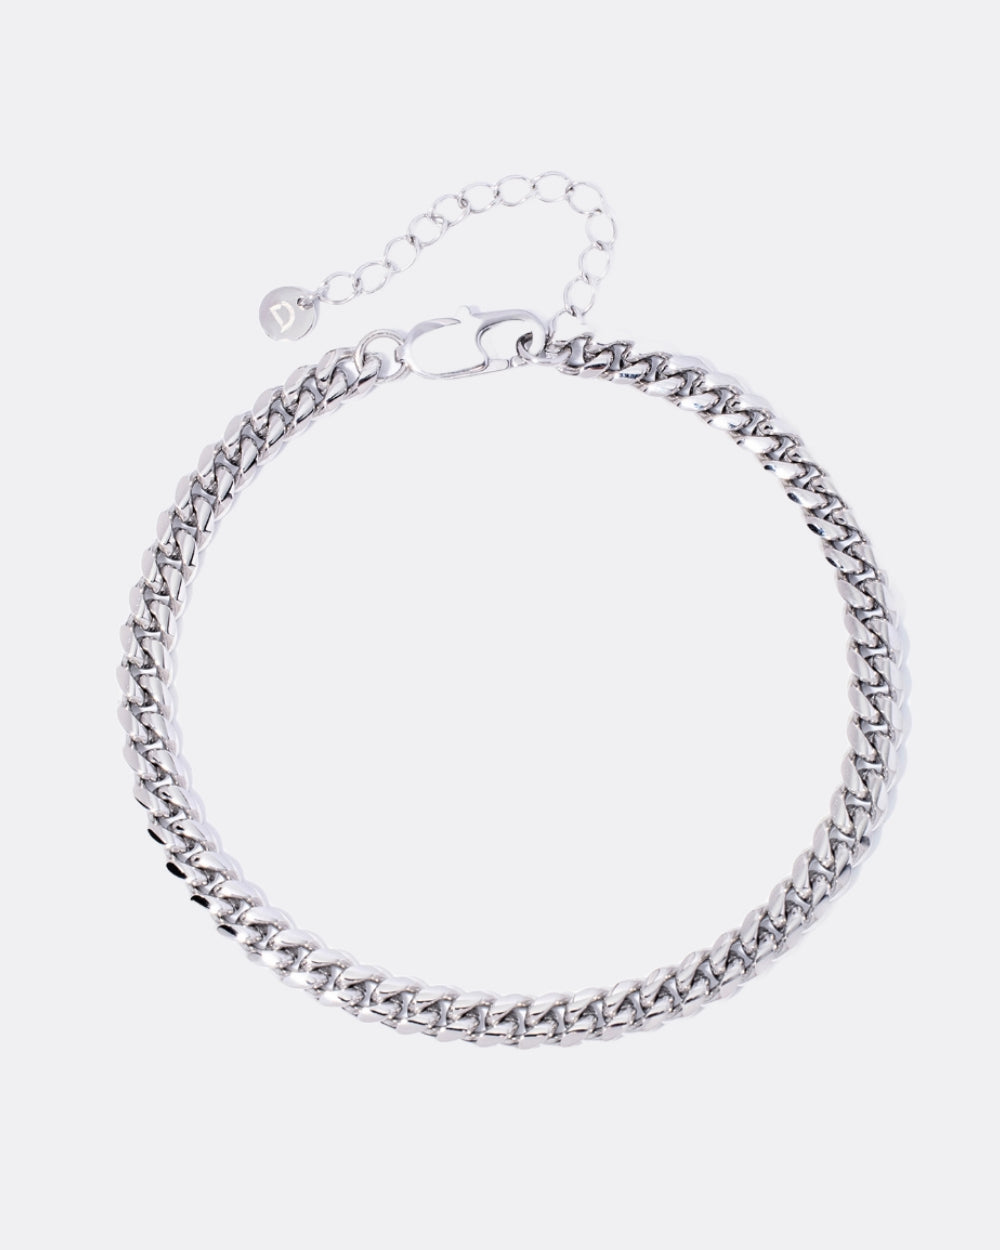 CLEAN CUBAN ANKLET. - 6MM WHITE GOLD